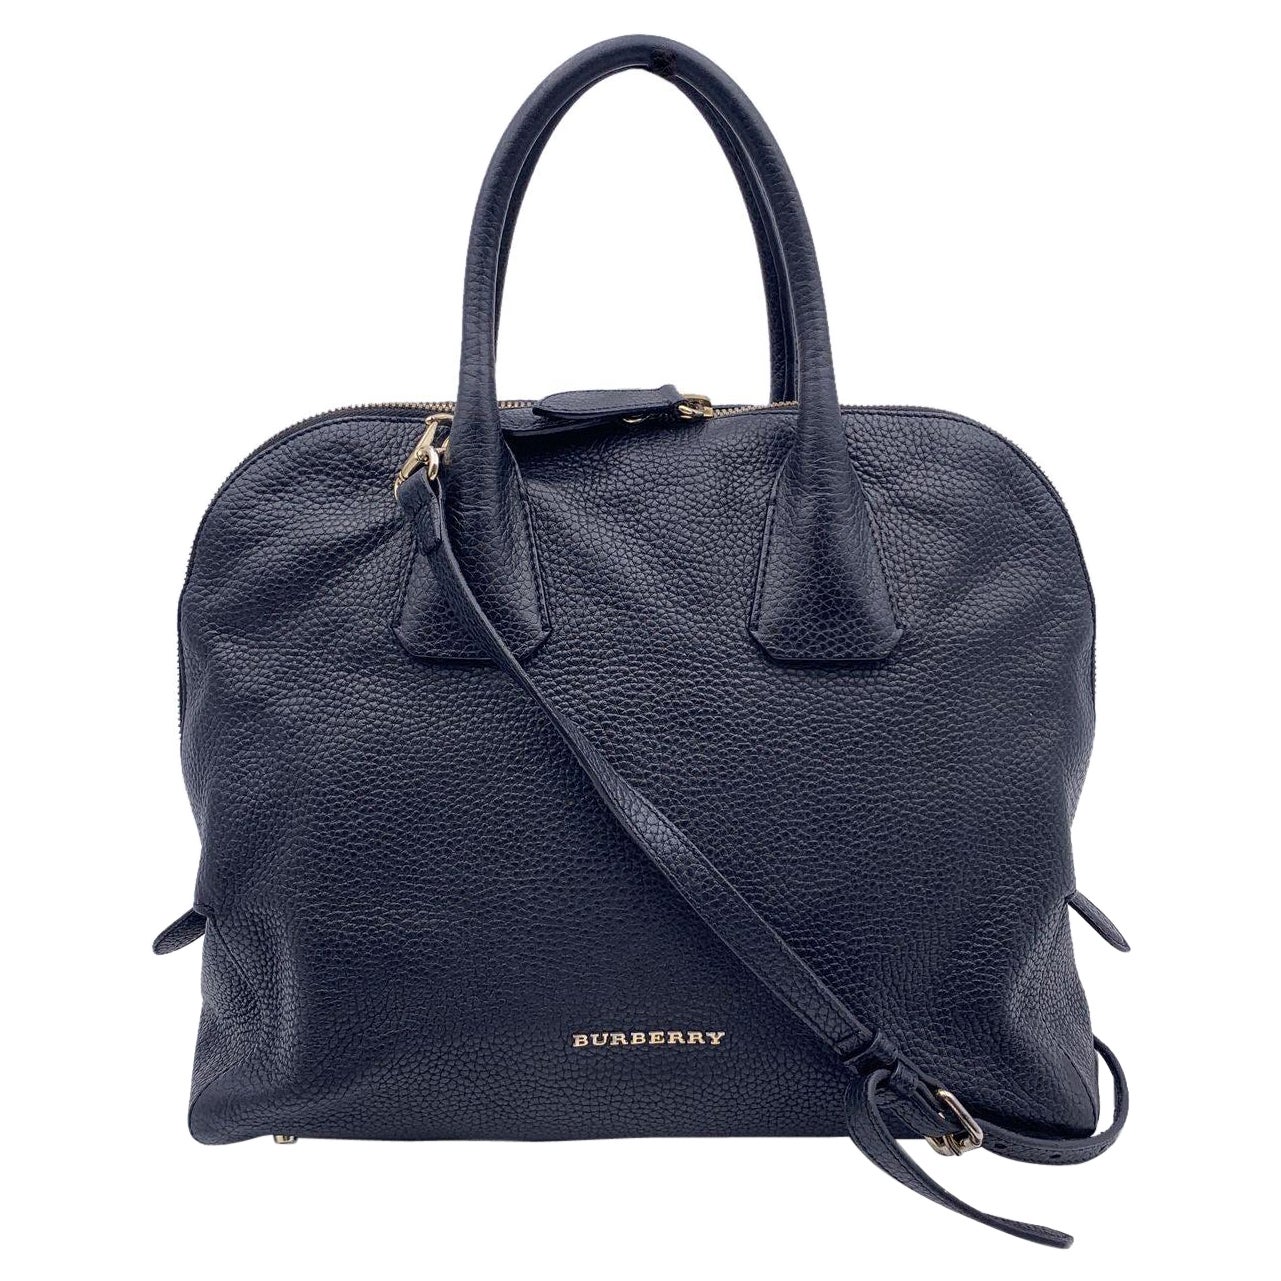 Burberry Black Leather Greenwood Dome Bag Satchel with Strap For Sale